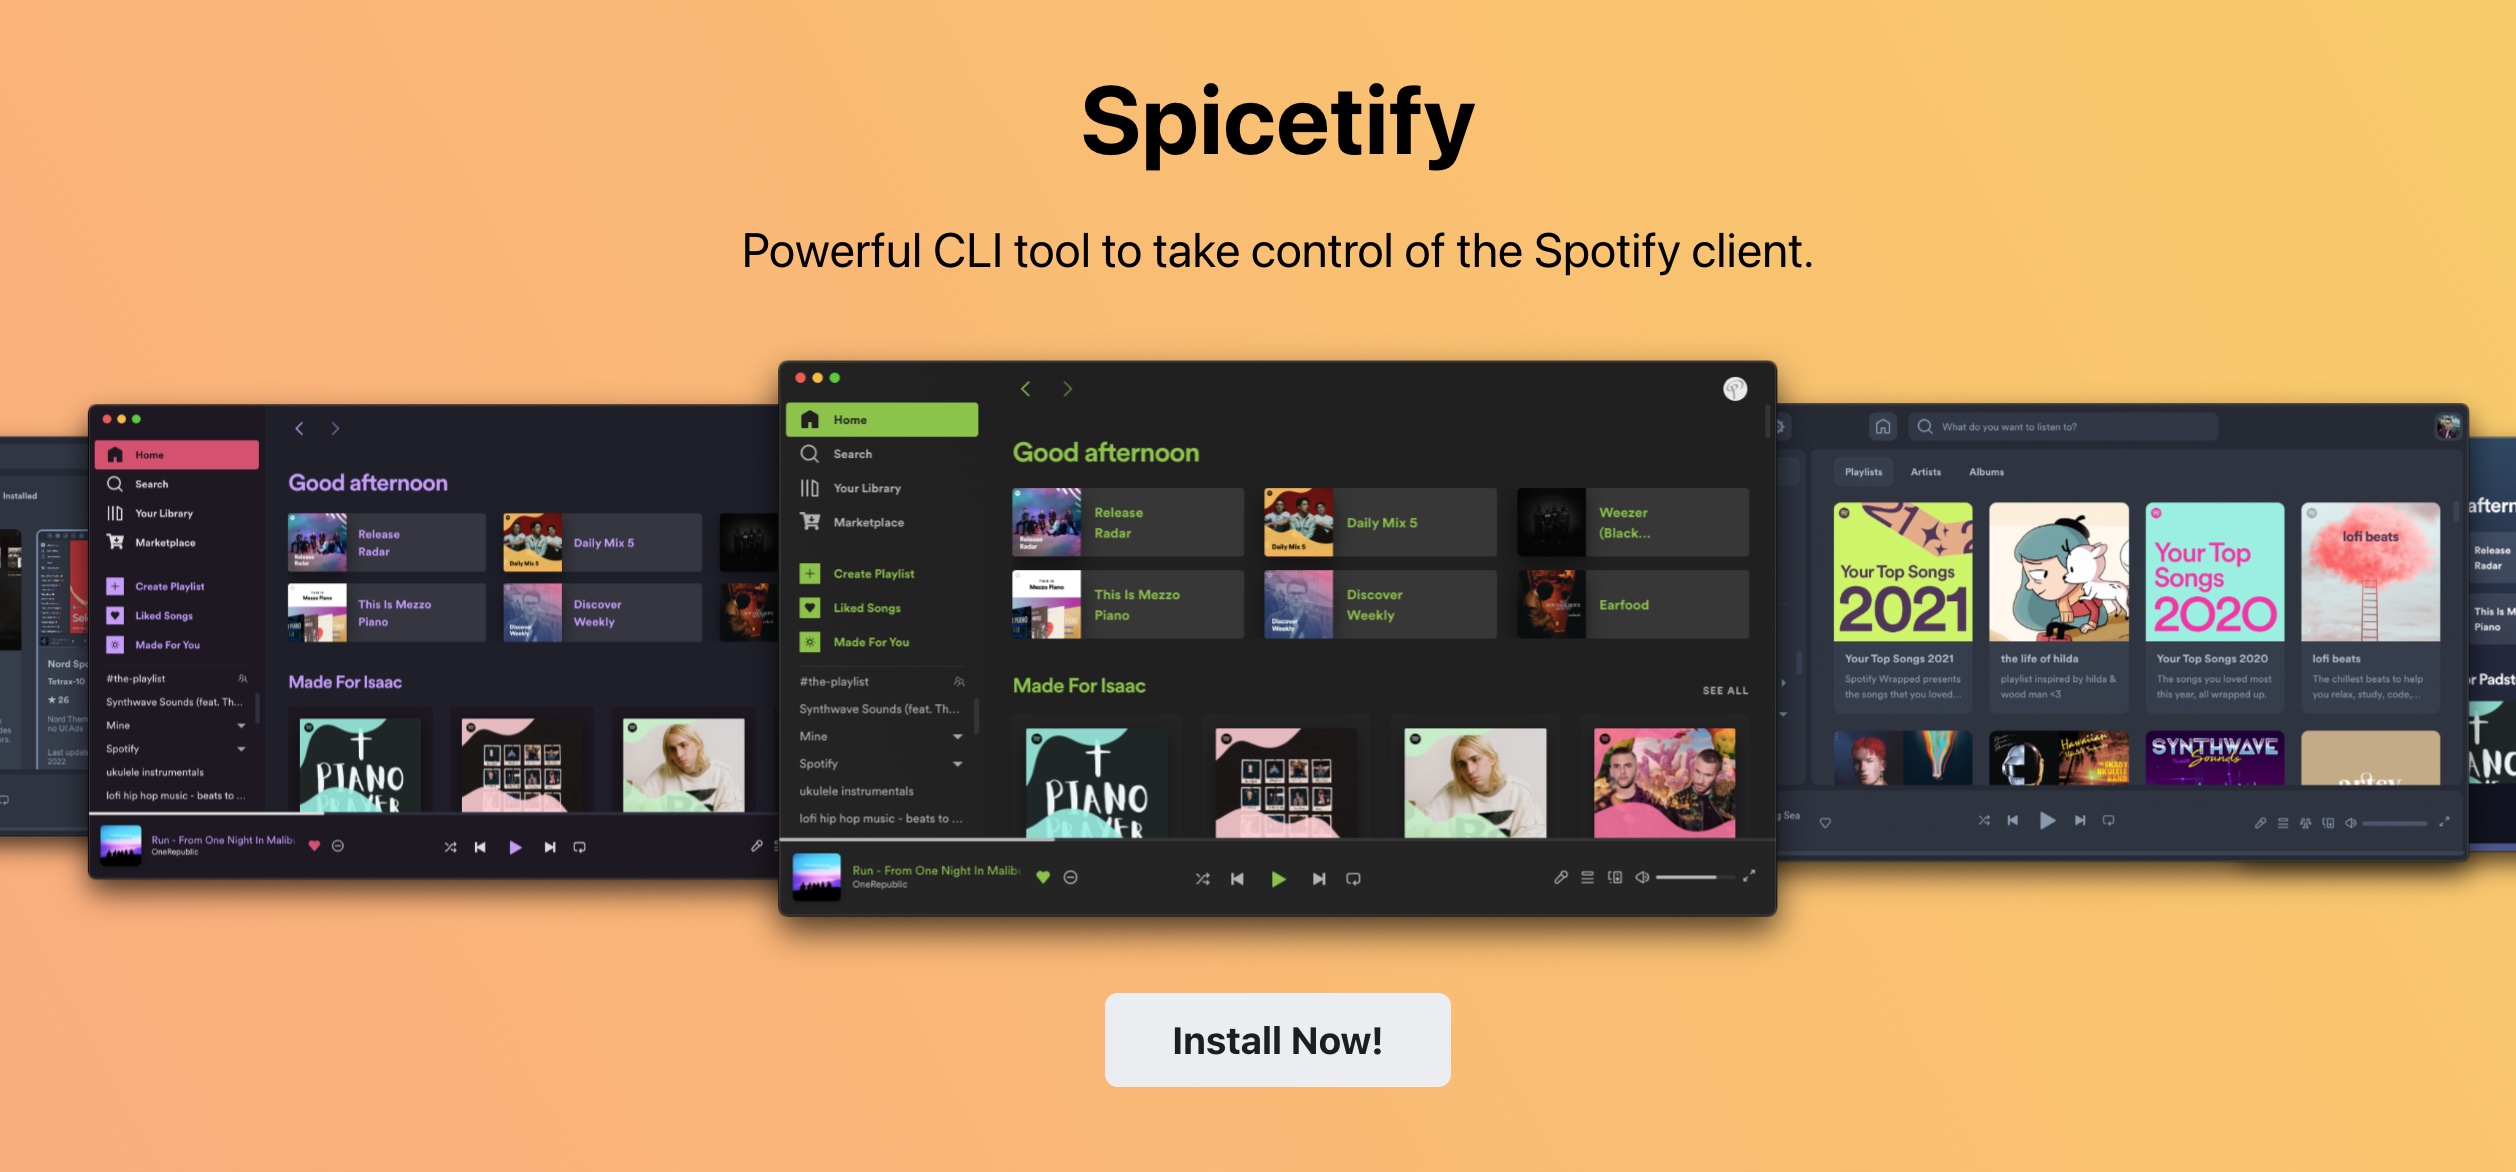 Spicetify